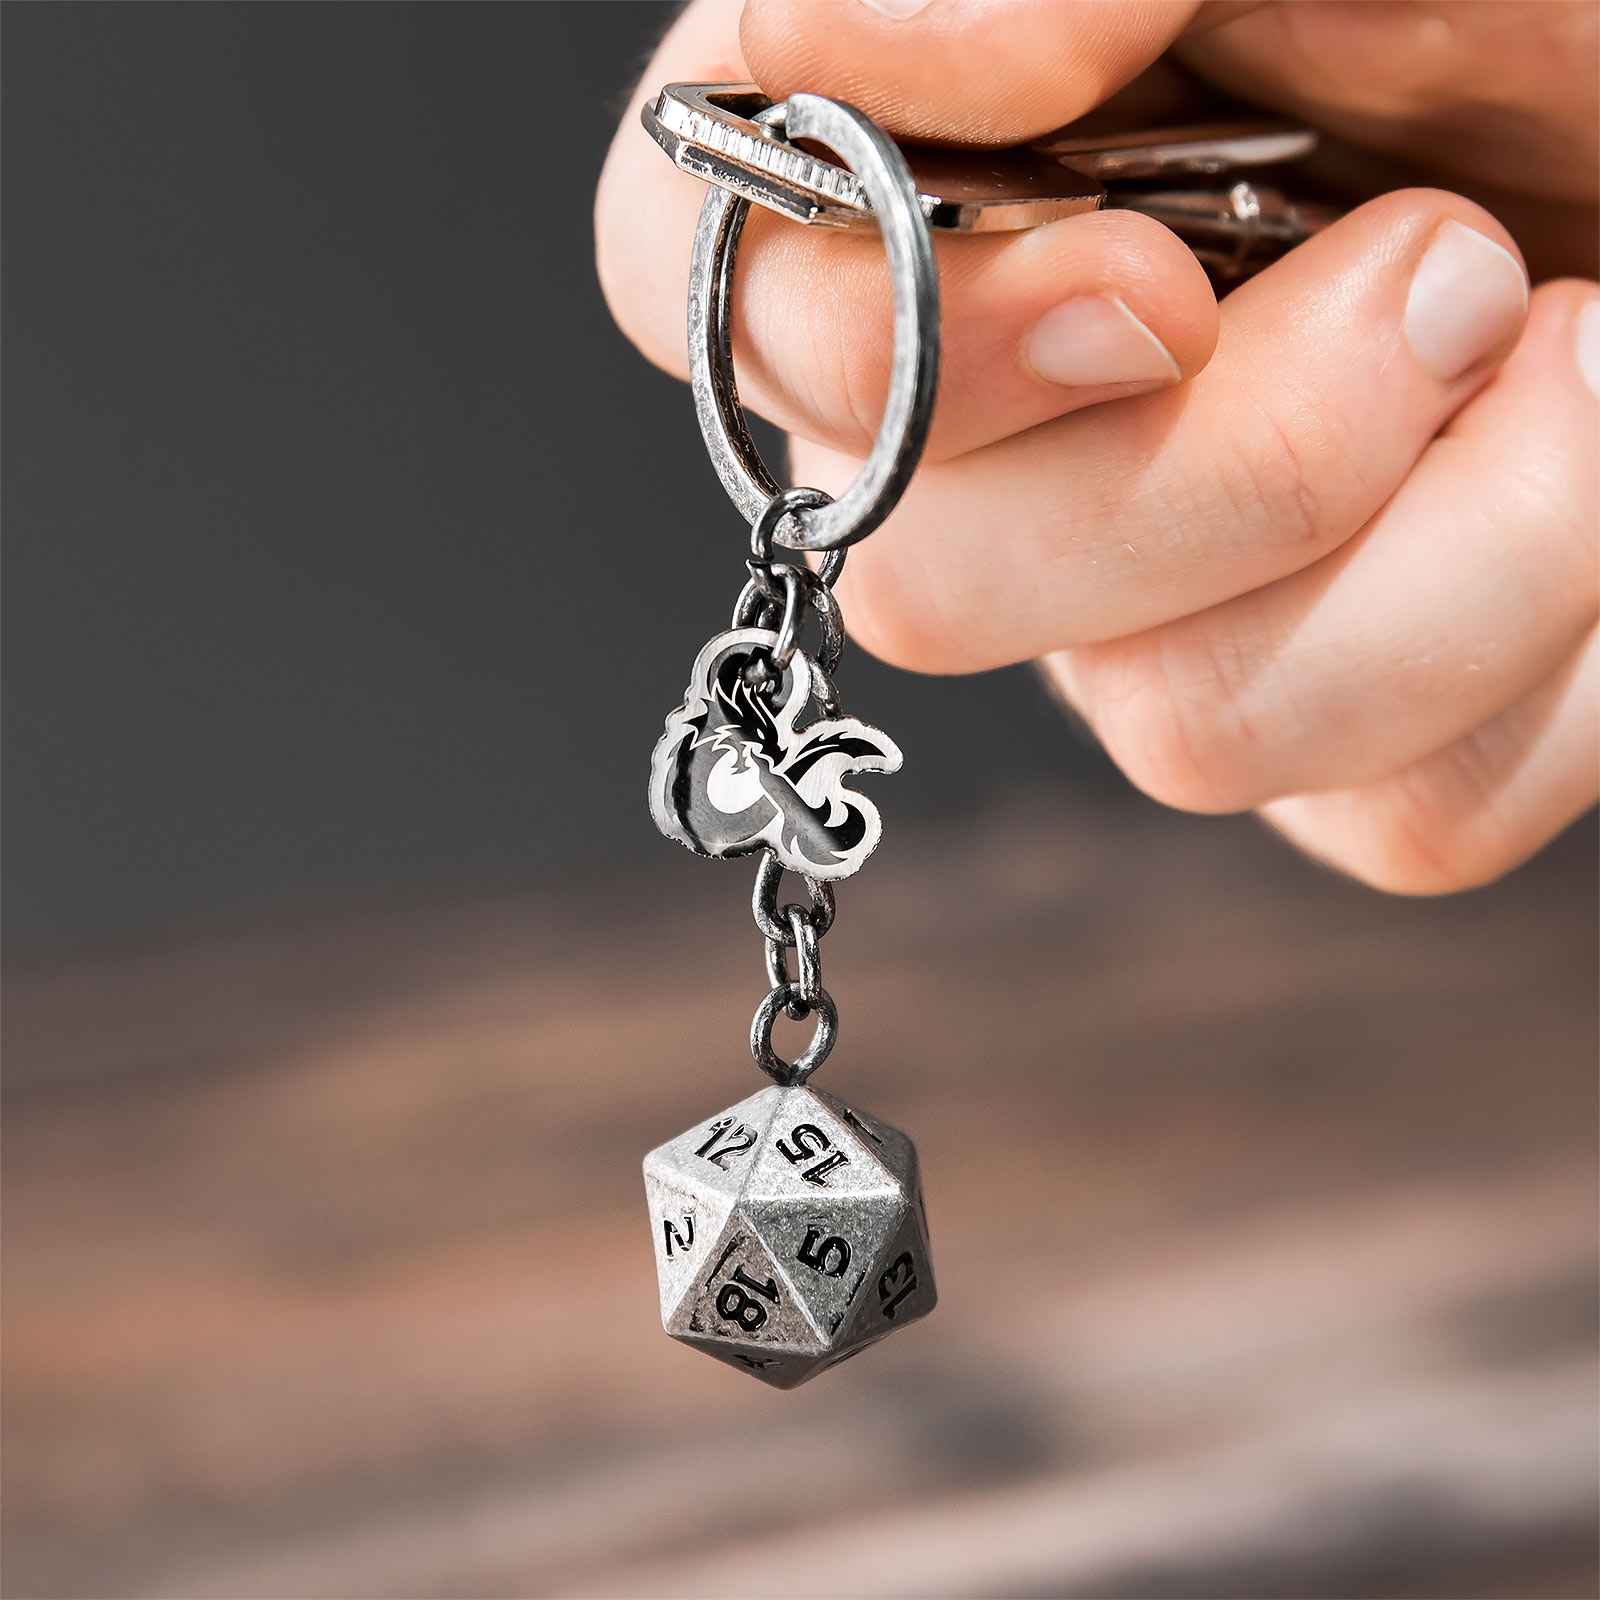 Dungeons & Dragons - D20 Dice Keychain